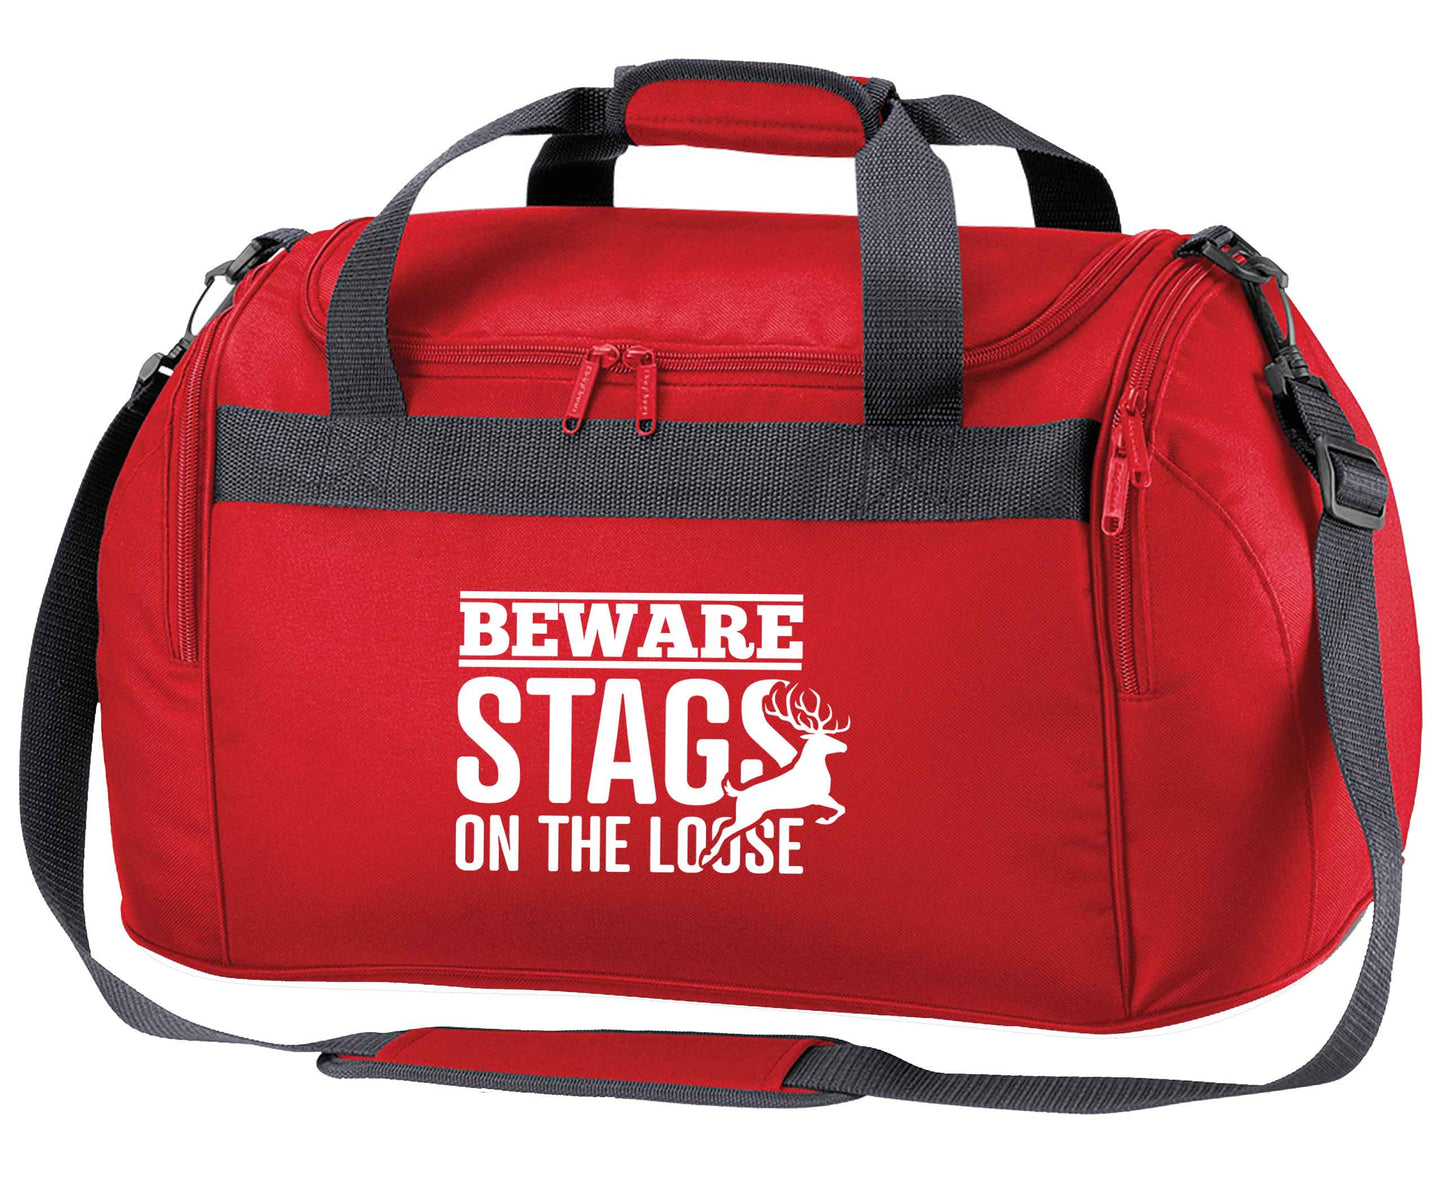 Beware stags on the loose red holdall / duffel bag